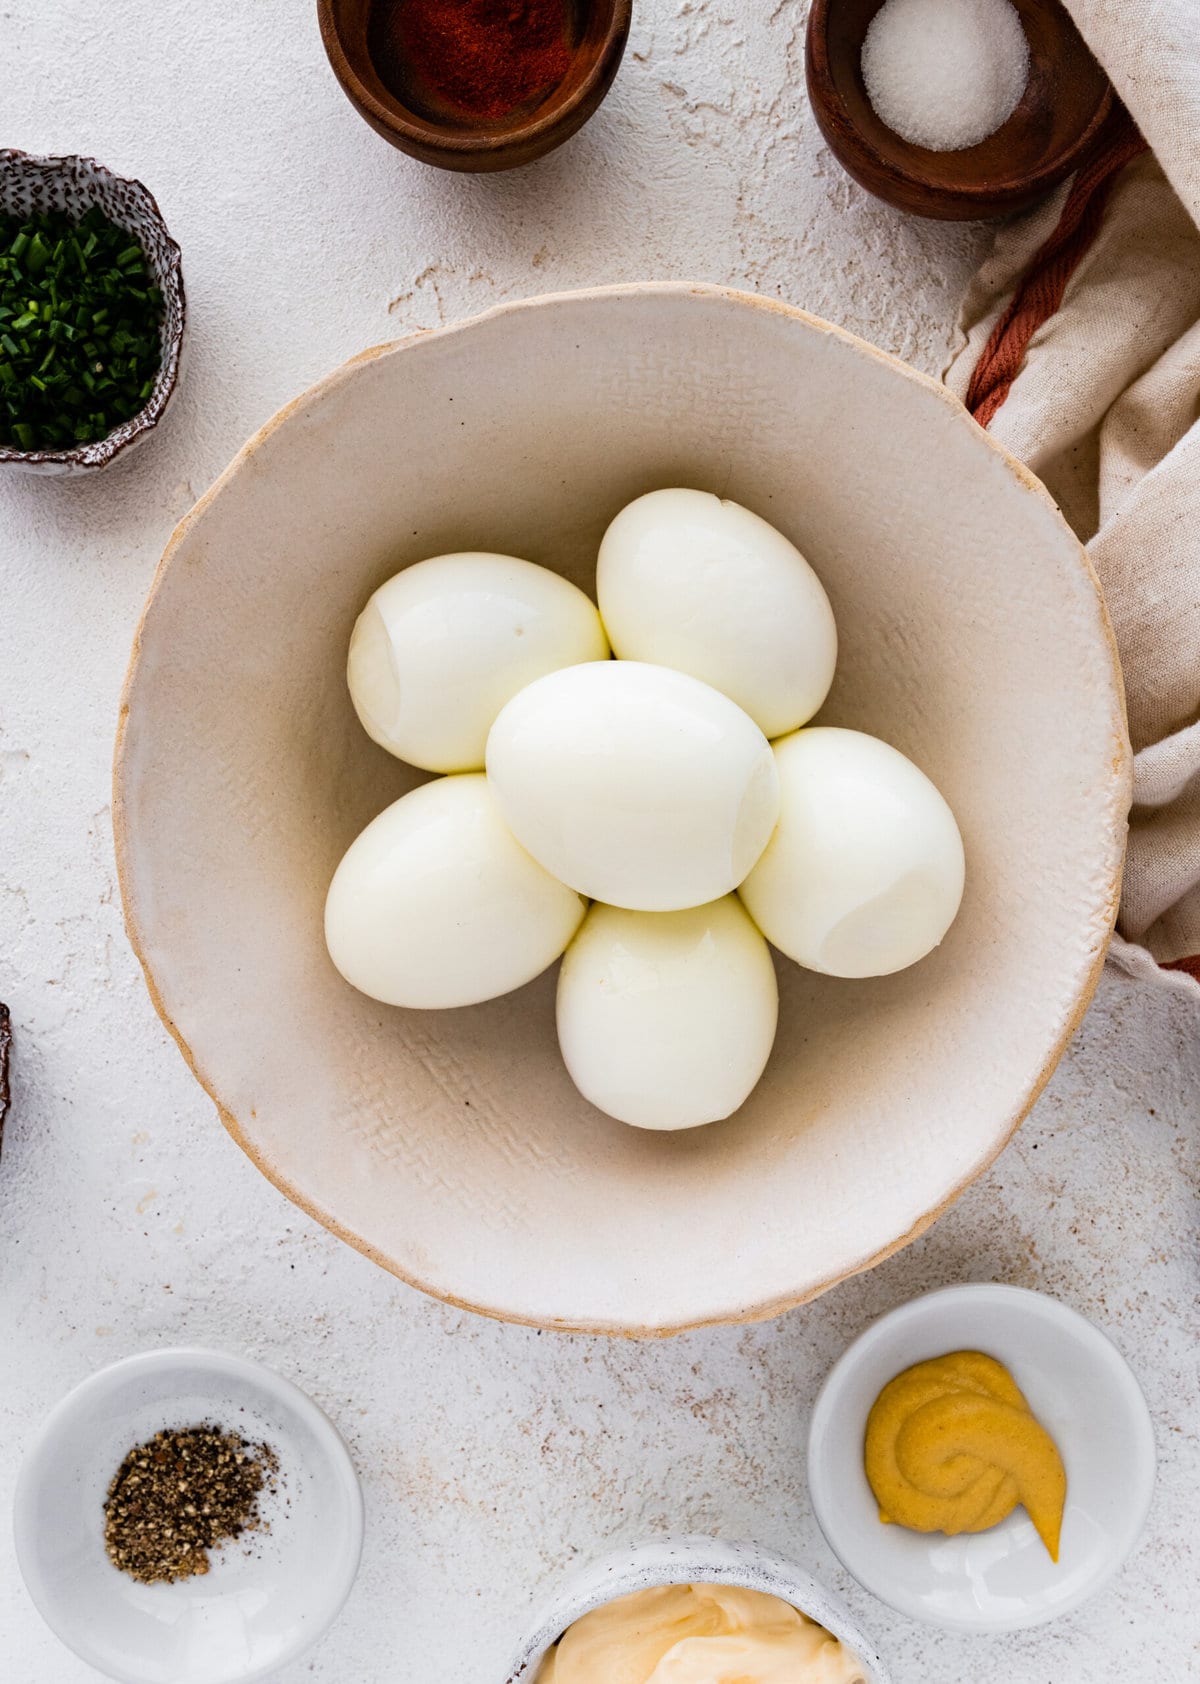 How to make classic deviled eggs step-by-step instructions: peeling the eggs.